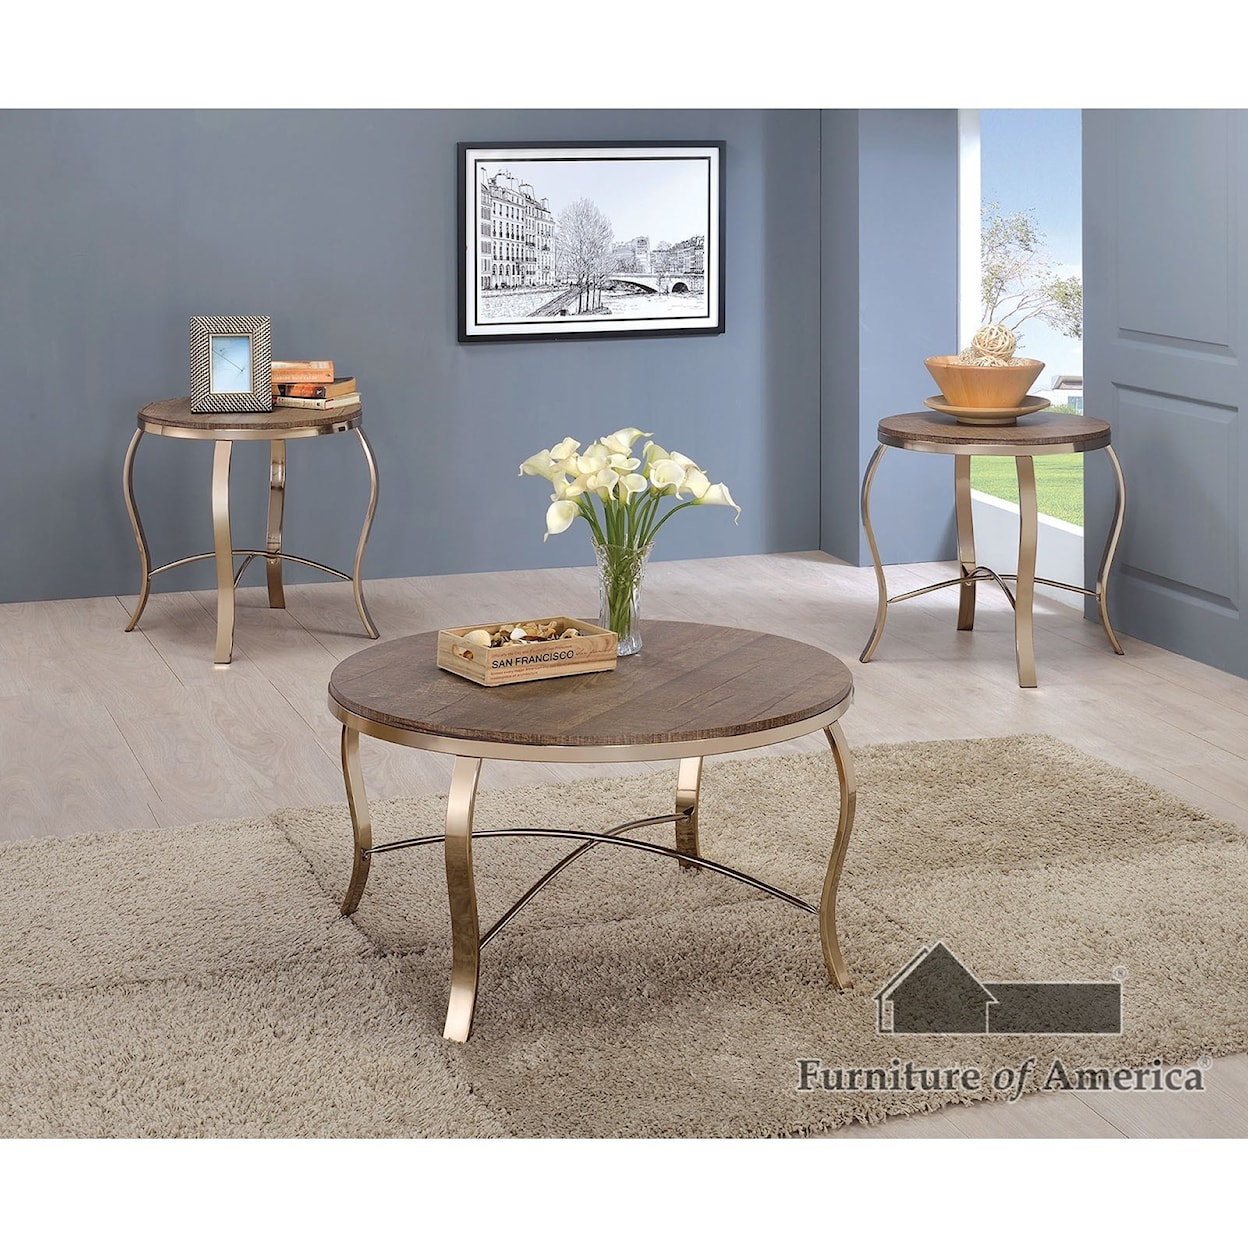 Furniture of America Wicklow GOLD & WOOD 3 PC OCCASIONAL SET |